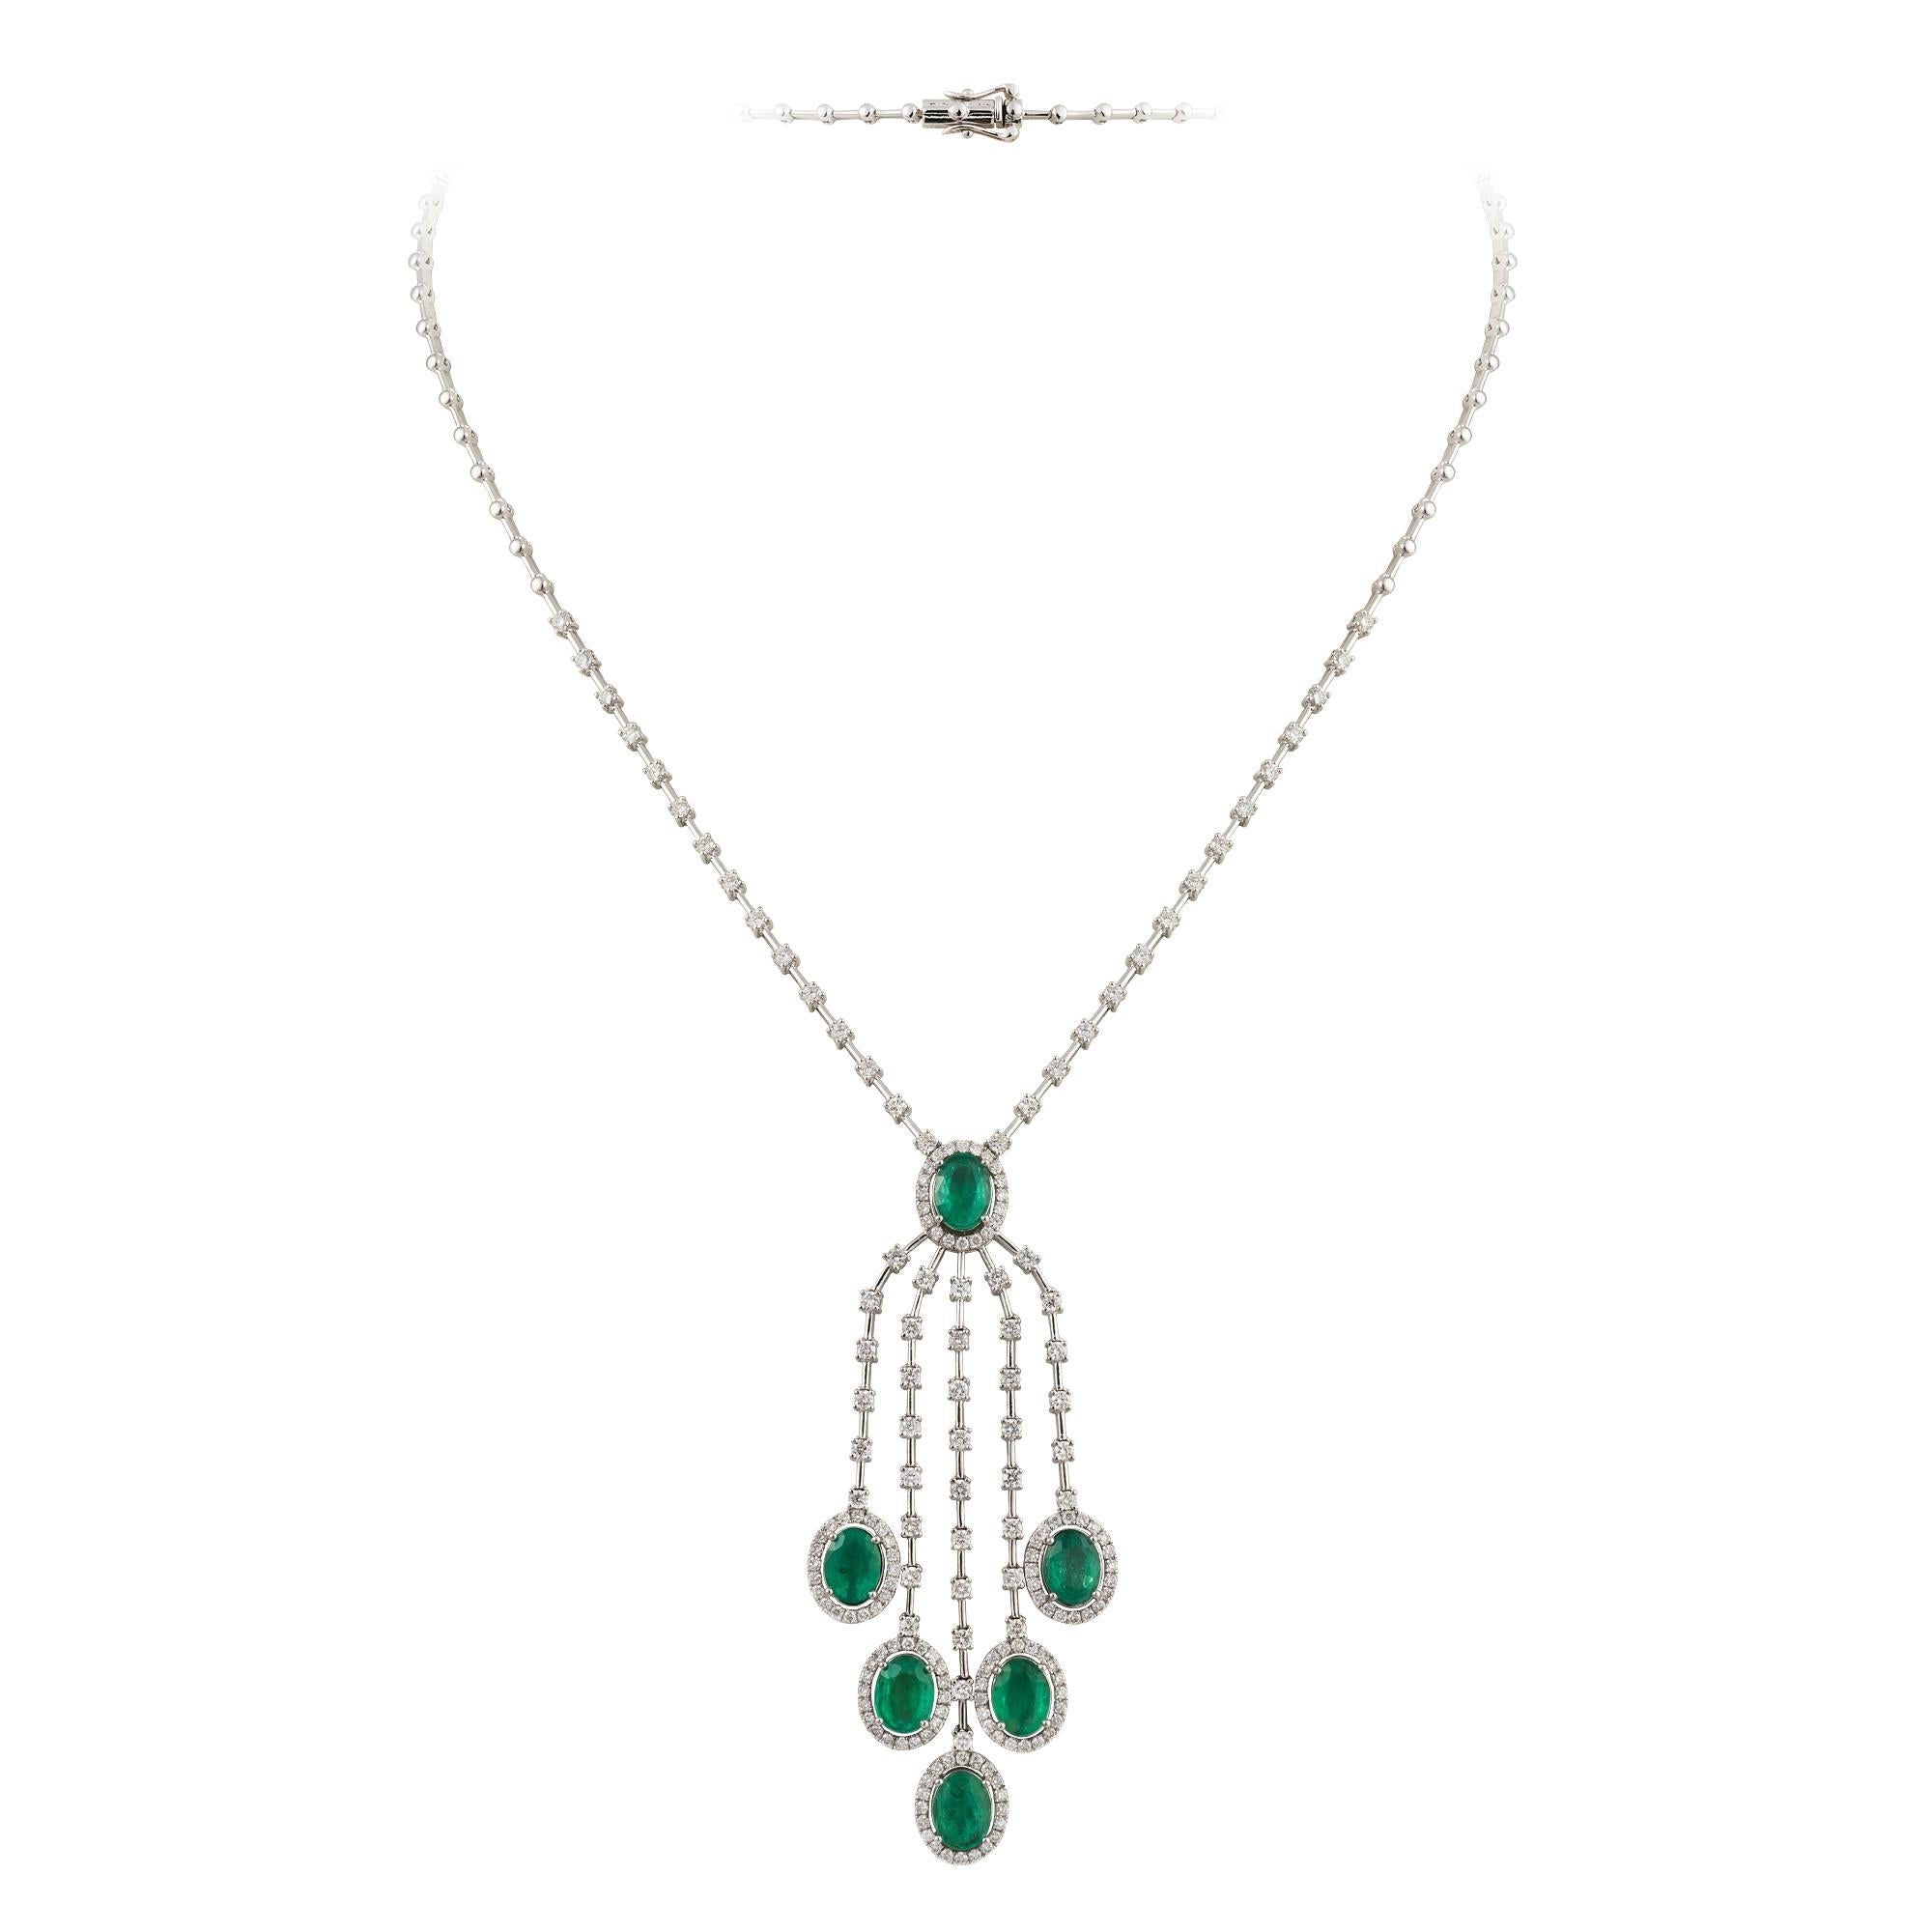 A Rare 18KT White Gold Emerald Diamond Necklace. Necklace is comprised of Finely Set Glittering Gorgeous Emerald Drop Necklace adorned with Sparkling Diamonds!!! The Emeralds and Diamonds are of Exquisite and Fine Quality. T.C.W. approx 9CTS!!! This